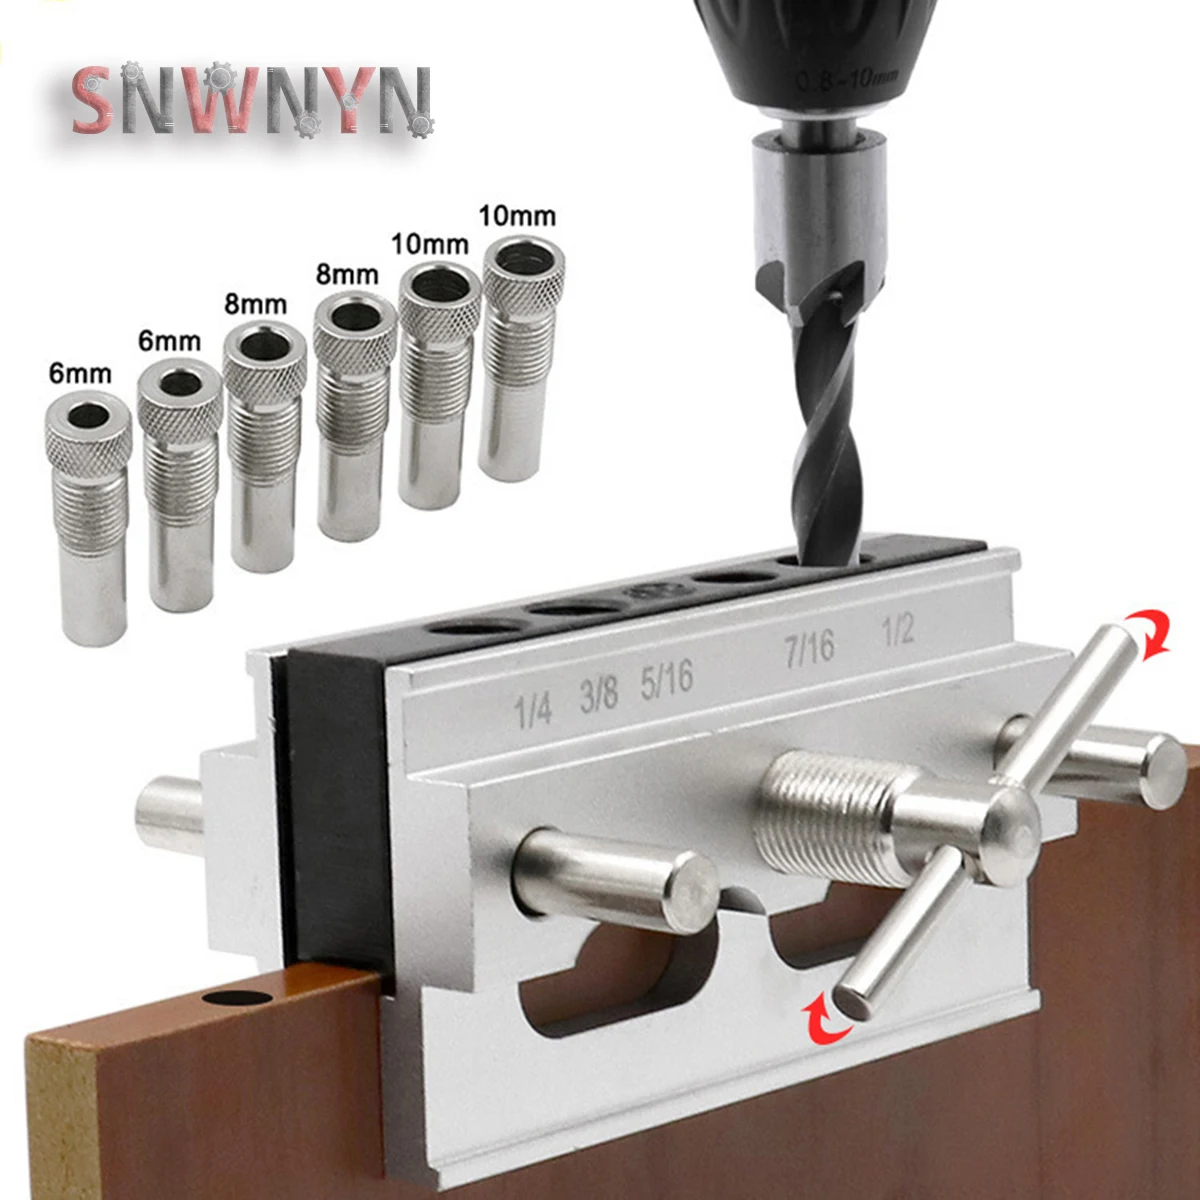 7pcs/set Metric/Imperial Doweling Jig Kit Woodworking Hole Locator Drill Guide Set Carpentry Tools For drill holes